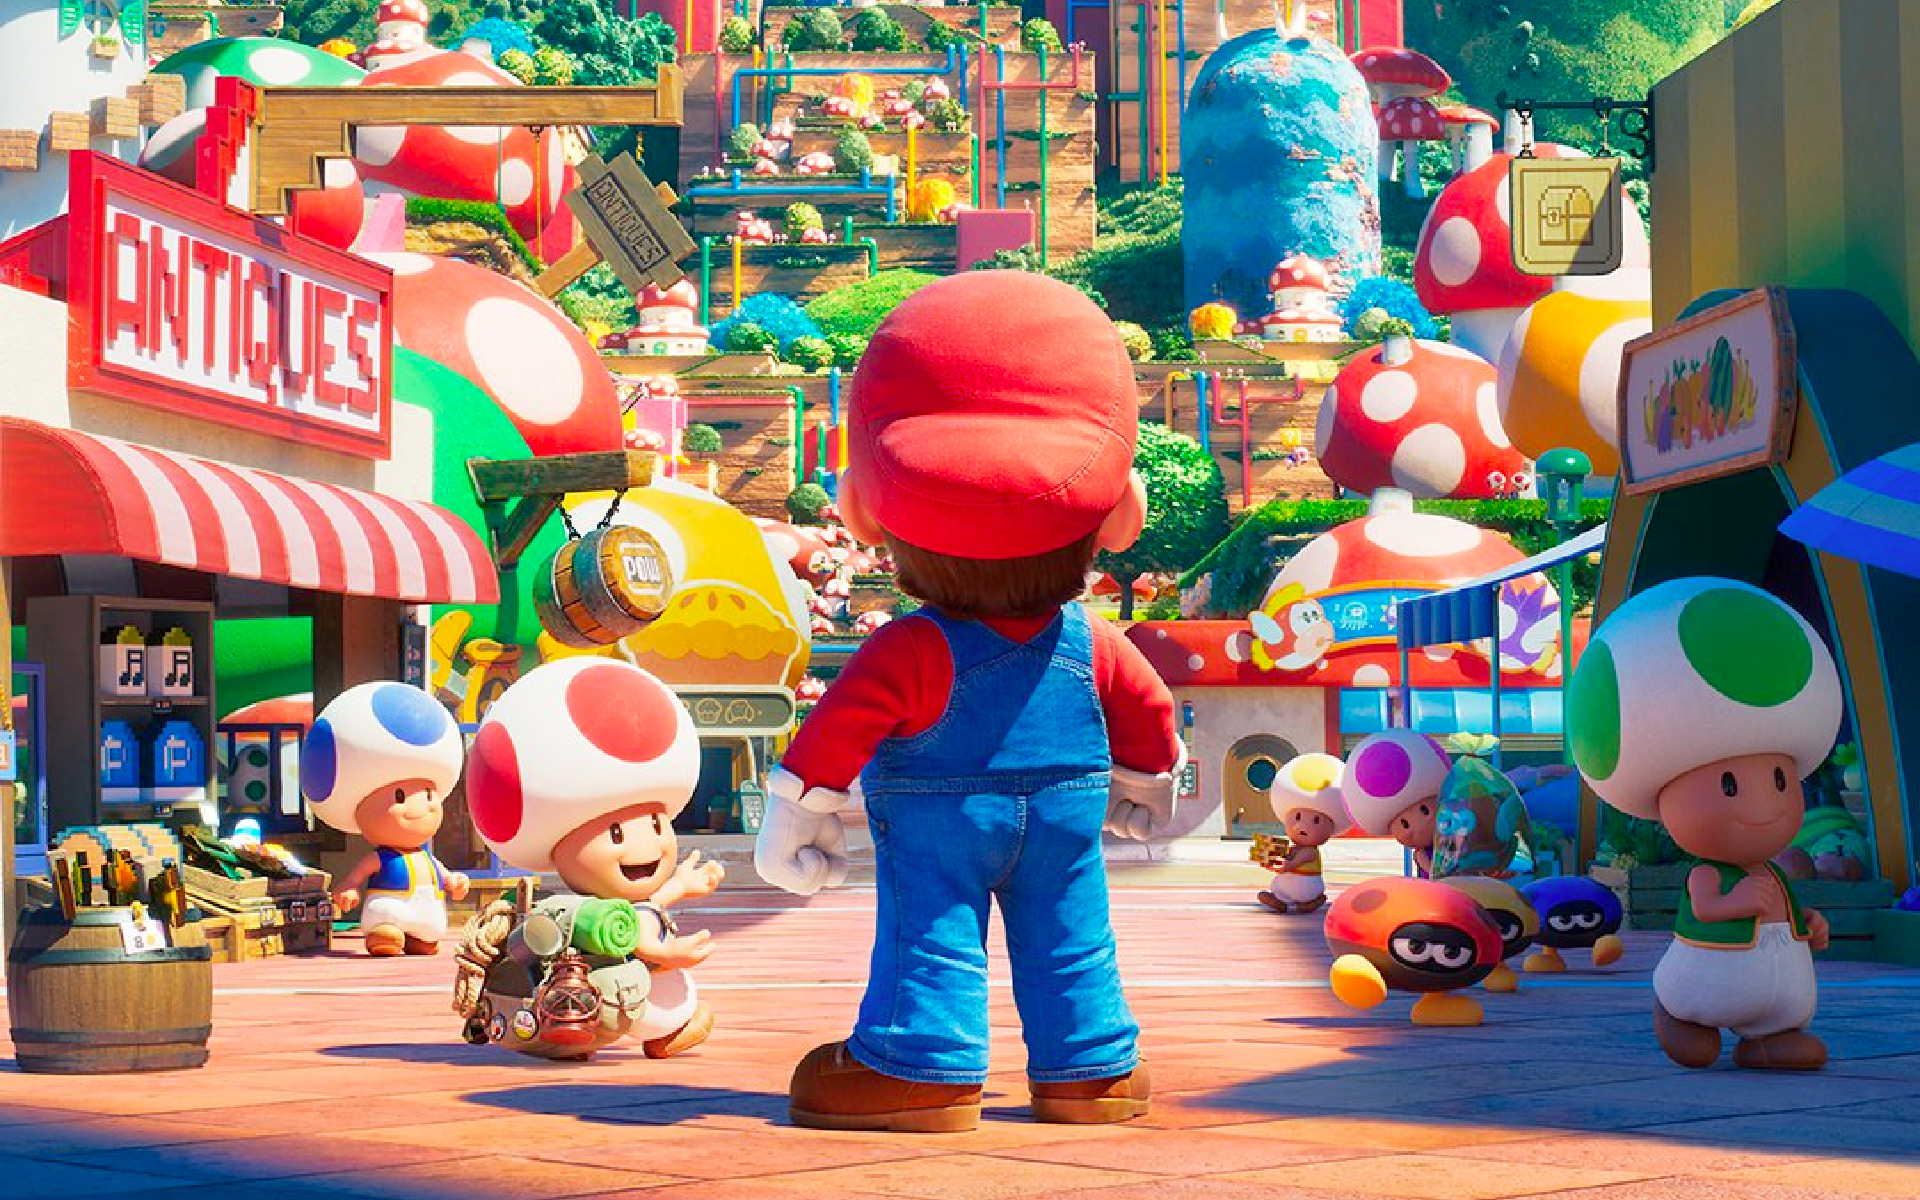 The back of Mario as he stands in a crowded shopping street populated by Toads in the Mushroom Kingdom